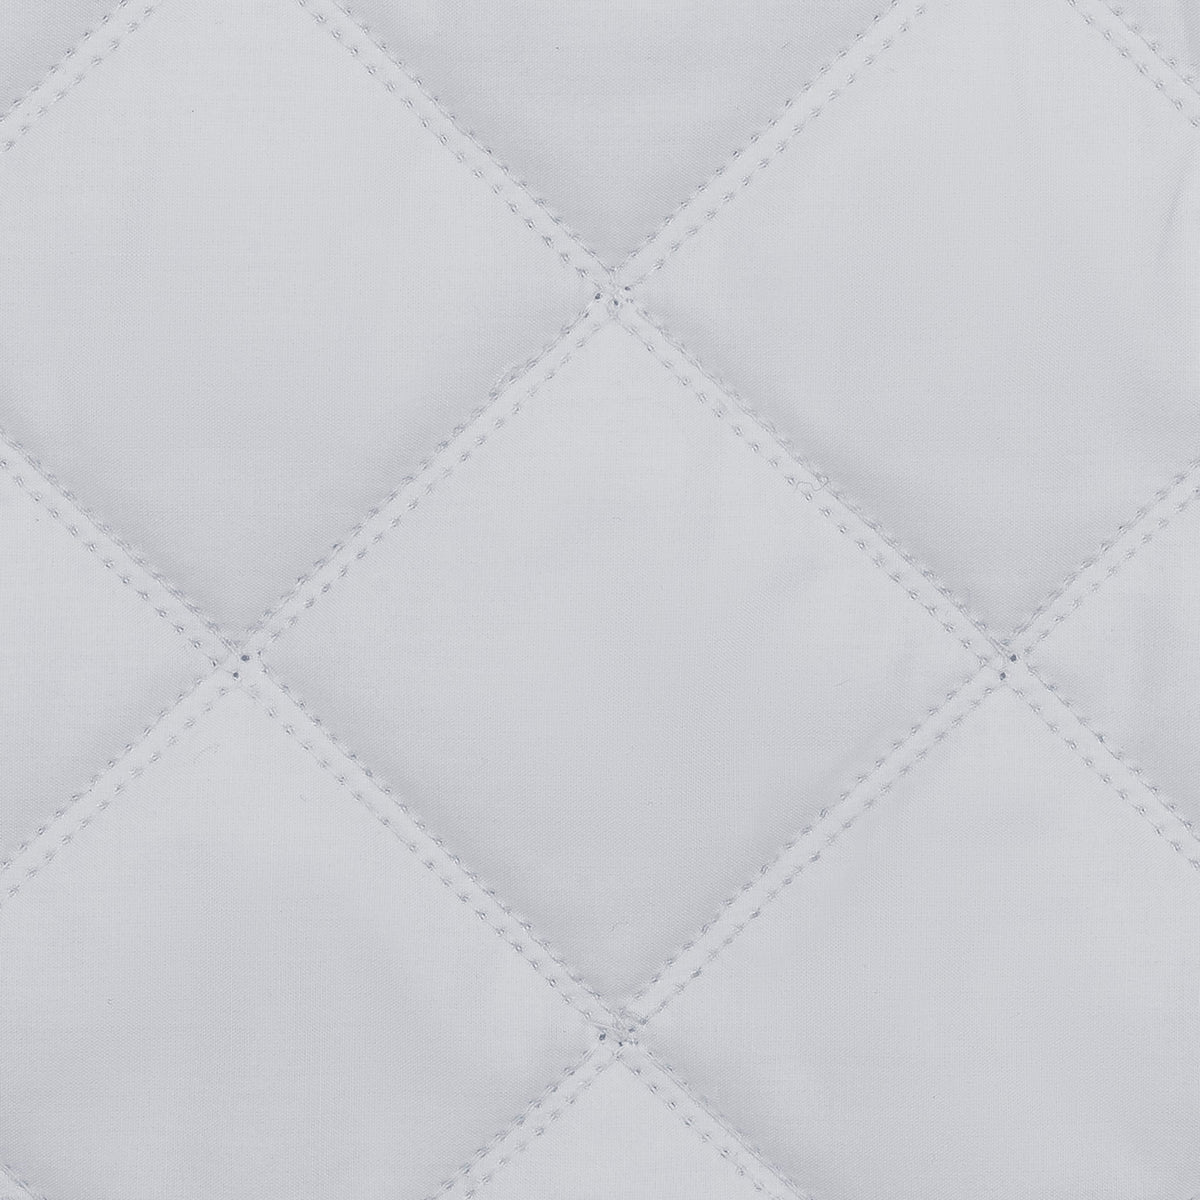 Swatch Sample of Matouk Milano Quilt Bedding in Color Dove